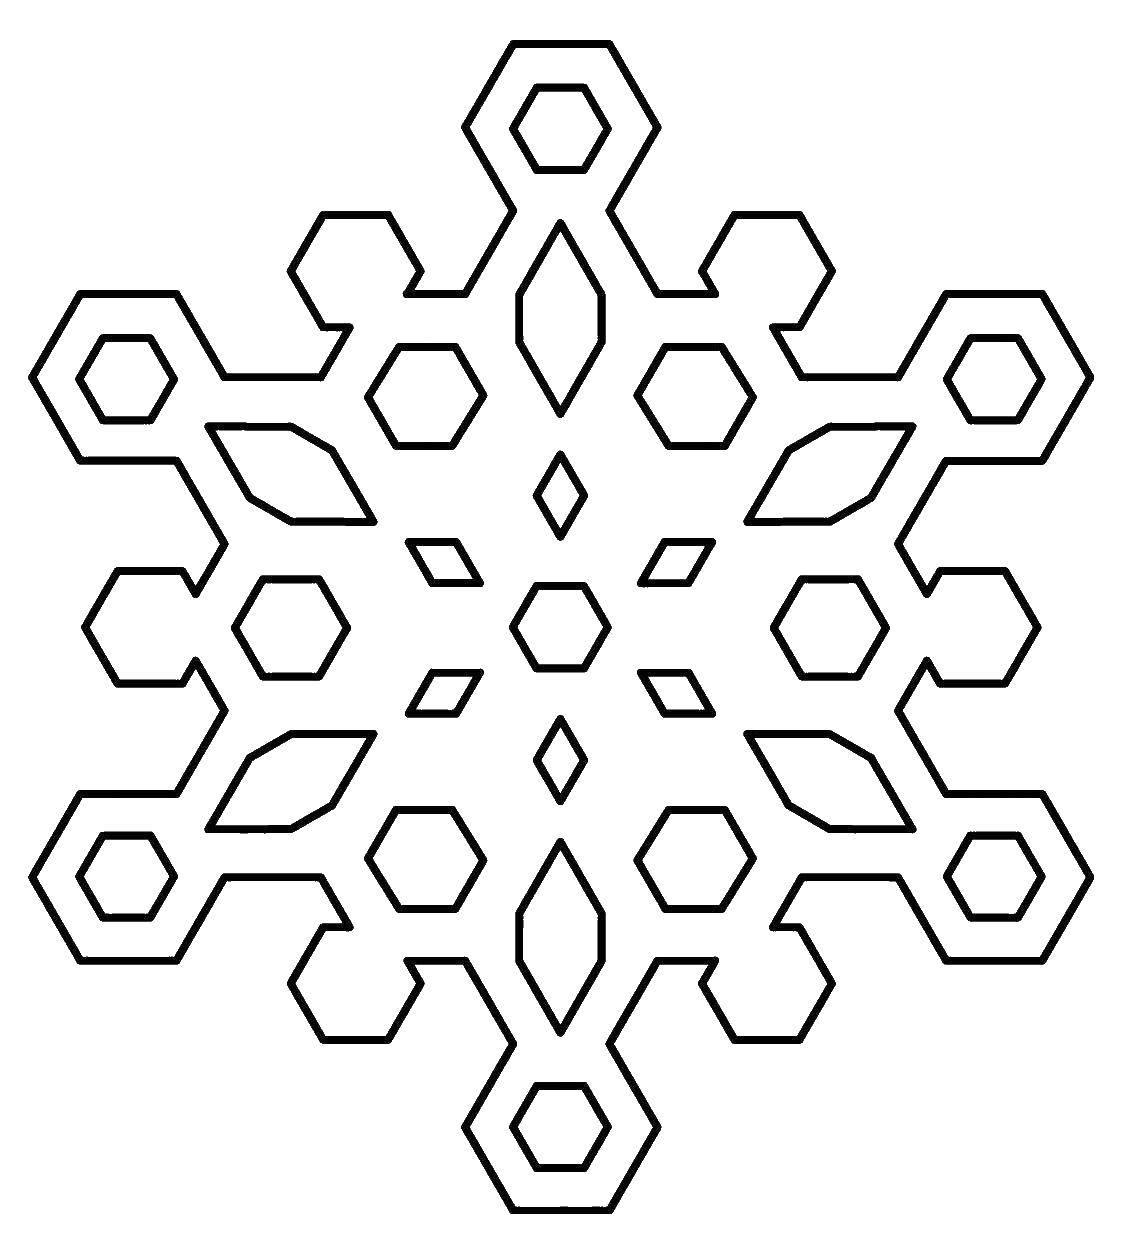 Coloring Snowflake. Category new year. Tags:  snowflake, new year, tree.